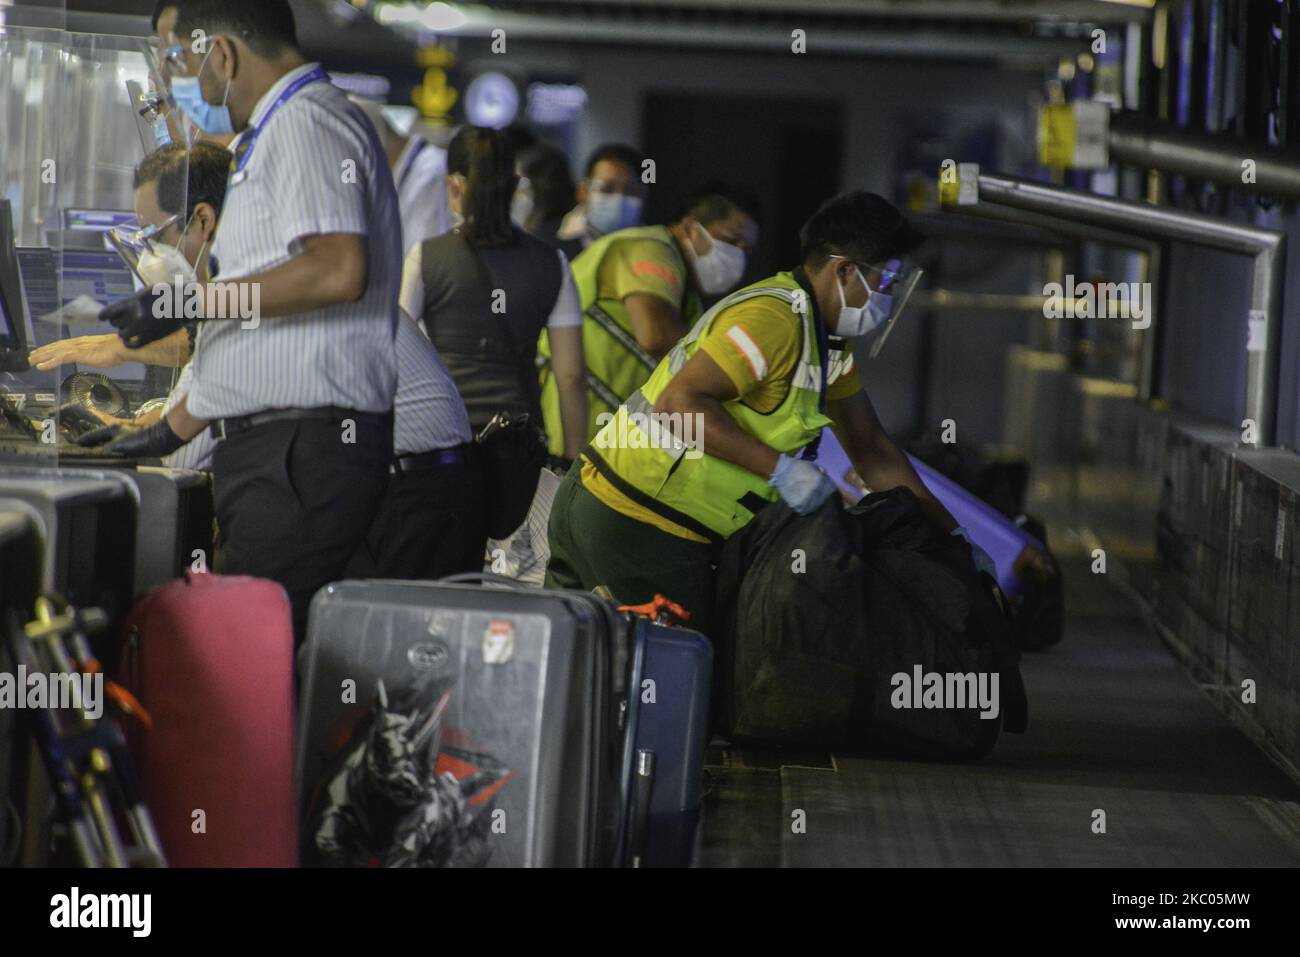 Airline employees move passenger bags at La Aurora International Airport, in Guatemala City, Guatemala on Friday, September 18. The airport opens its international flight operations, and remained closed for 6 months to prevent the spread of COVID-19. During the pandemic, 84,344 people were infected and 3,076 died. (Photo by Deccio Serrano/NurPhoto) Stock Photo